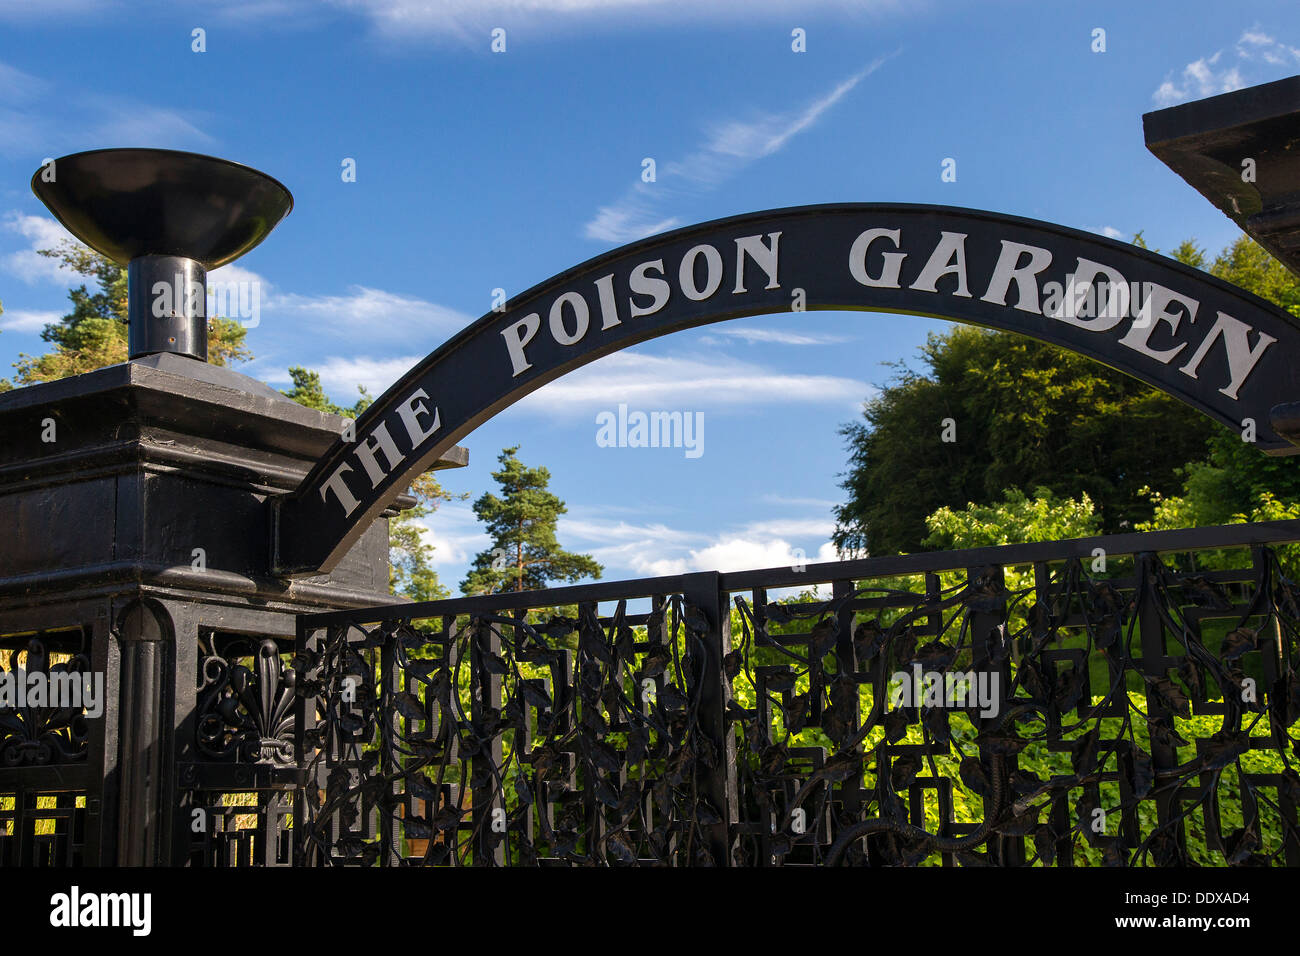 Le Poison Jardin, Alnwick, Northumberland Banque D'Images